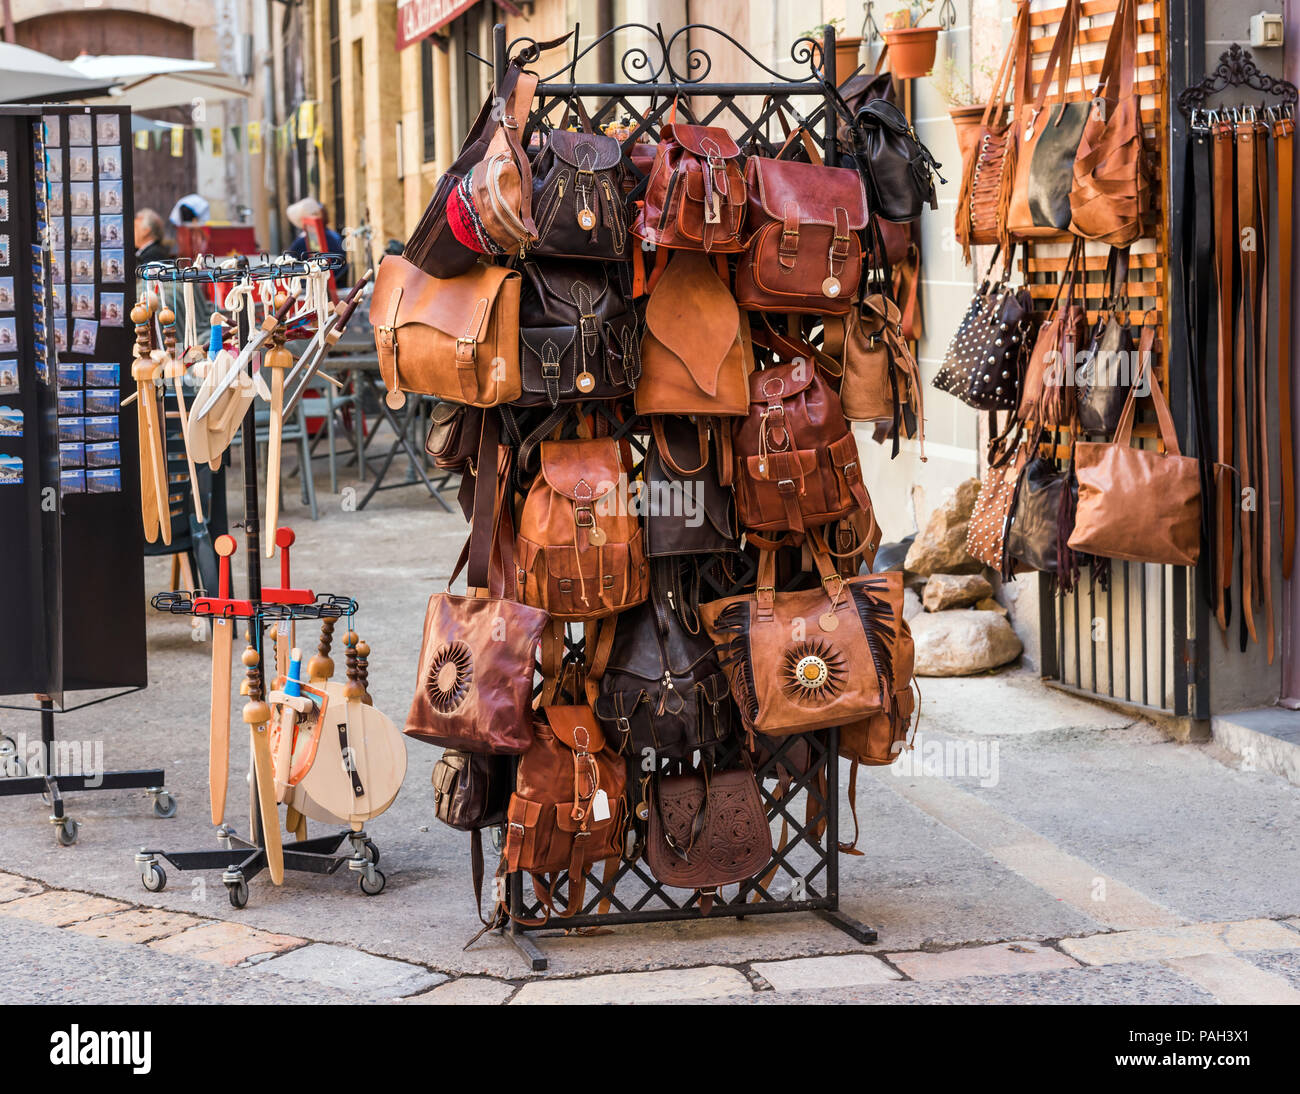 Leather Market Spain High Resolution Stock Photography and Images - Alamy